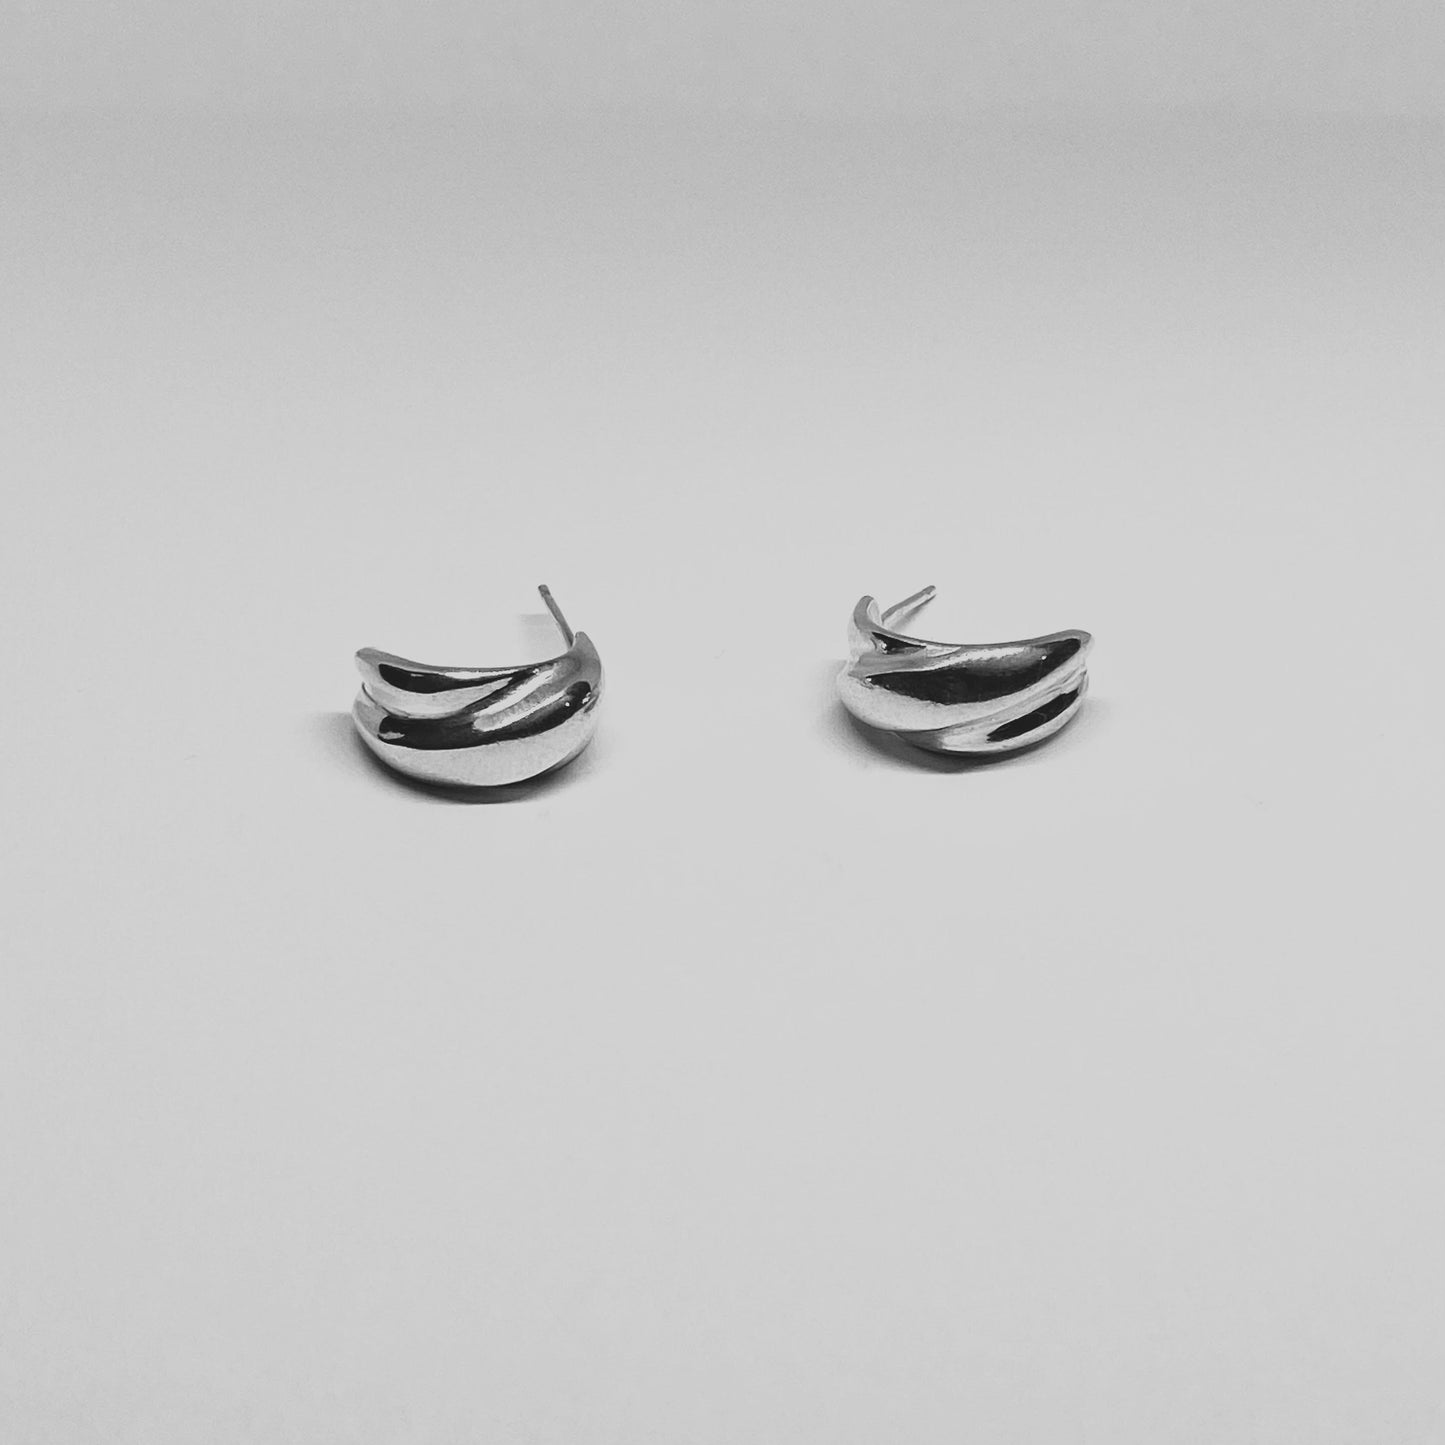 The Malan earrings are handmade and made of 925 sterling silver. They are shiny and polished